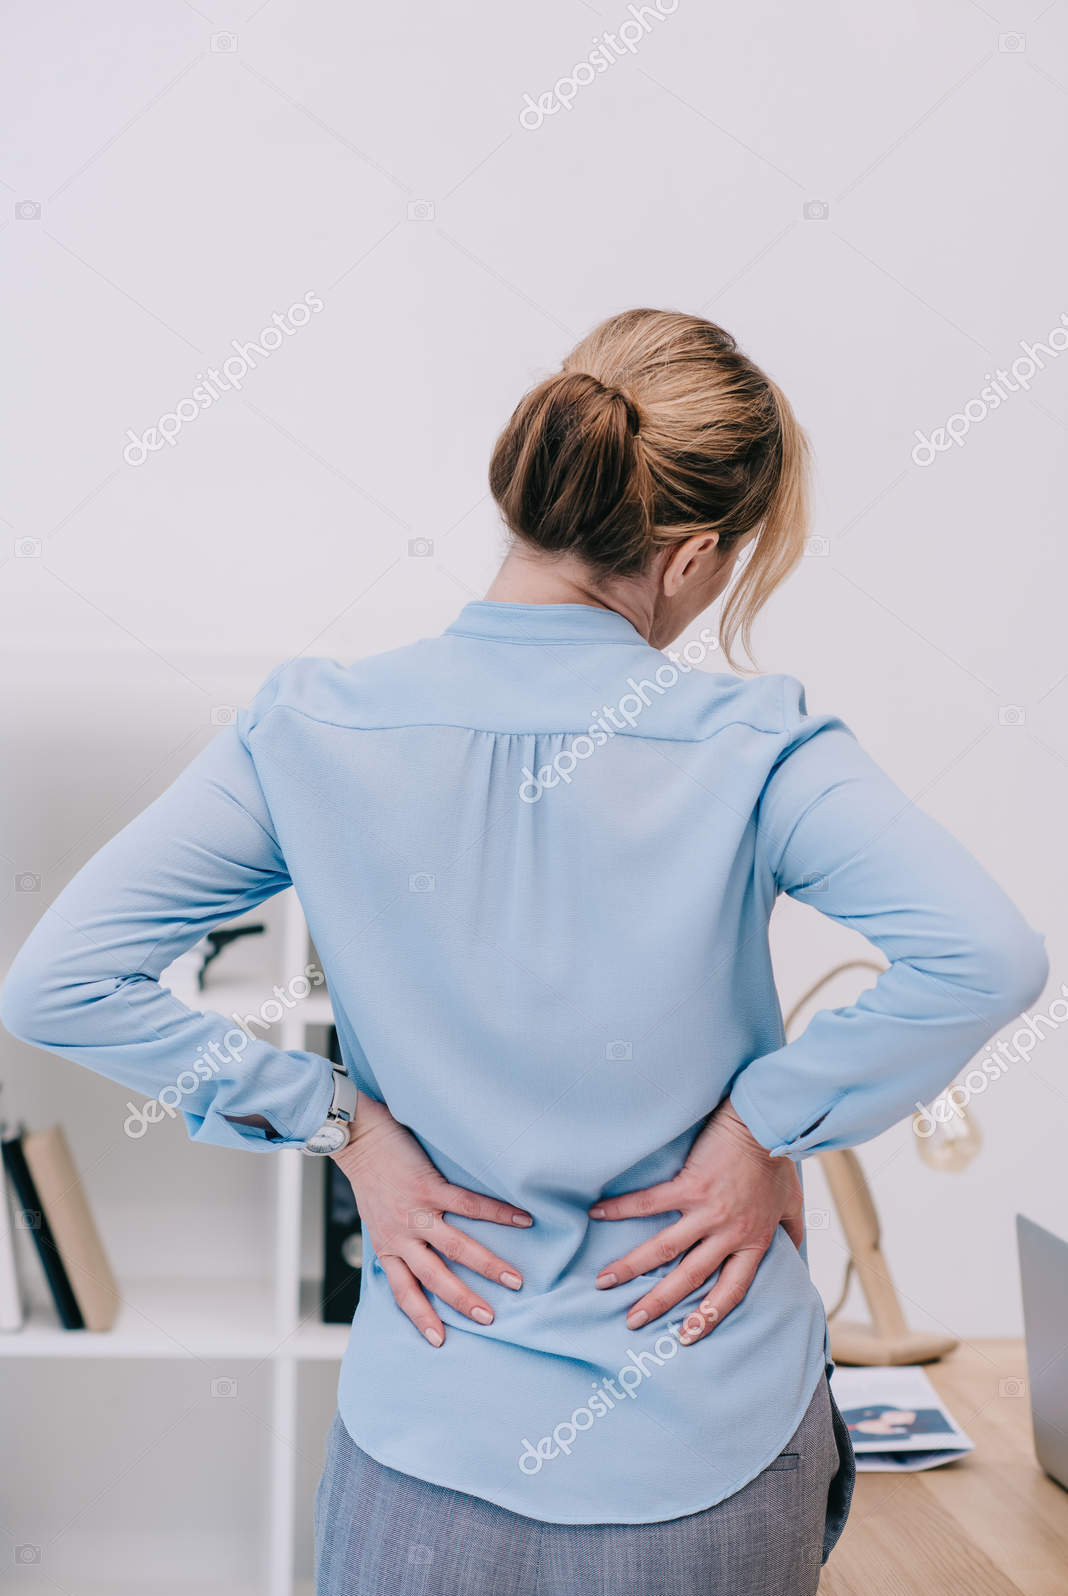 depositphotos_182638430-stock-photo-rear-view-overworked-businesswoman-backpain